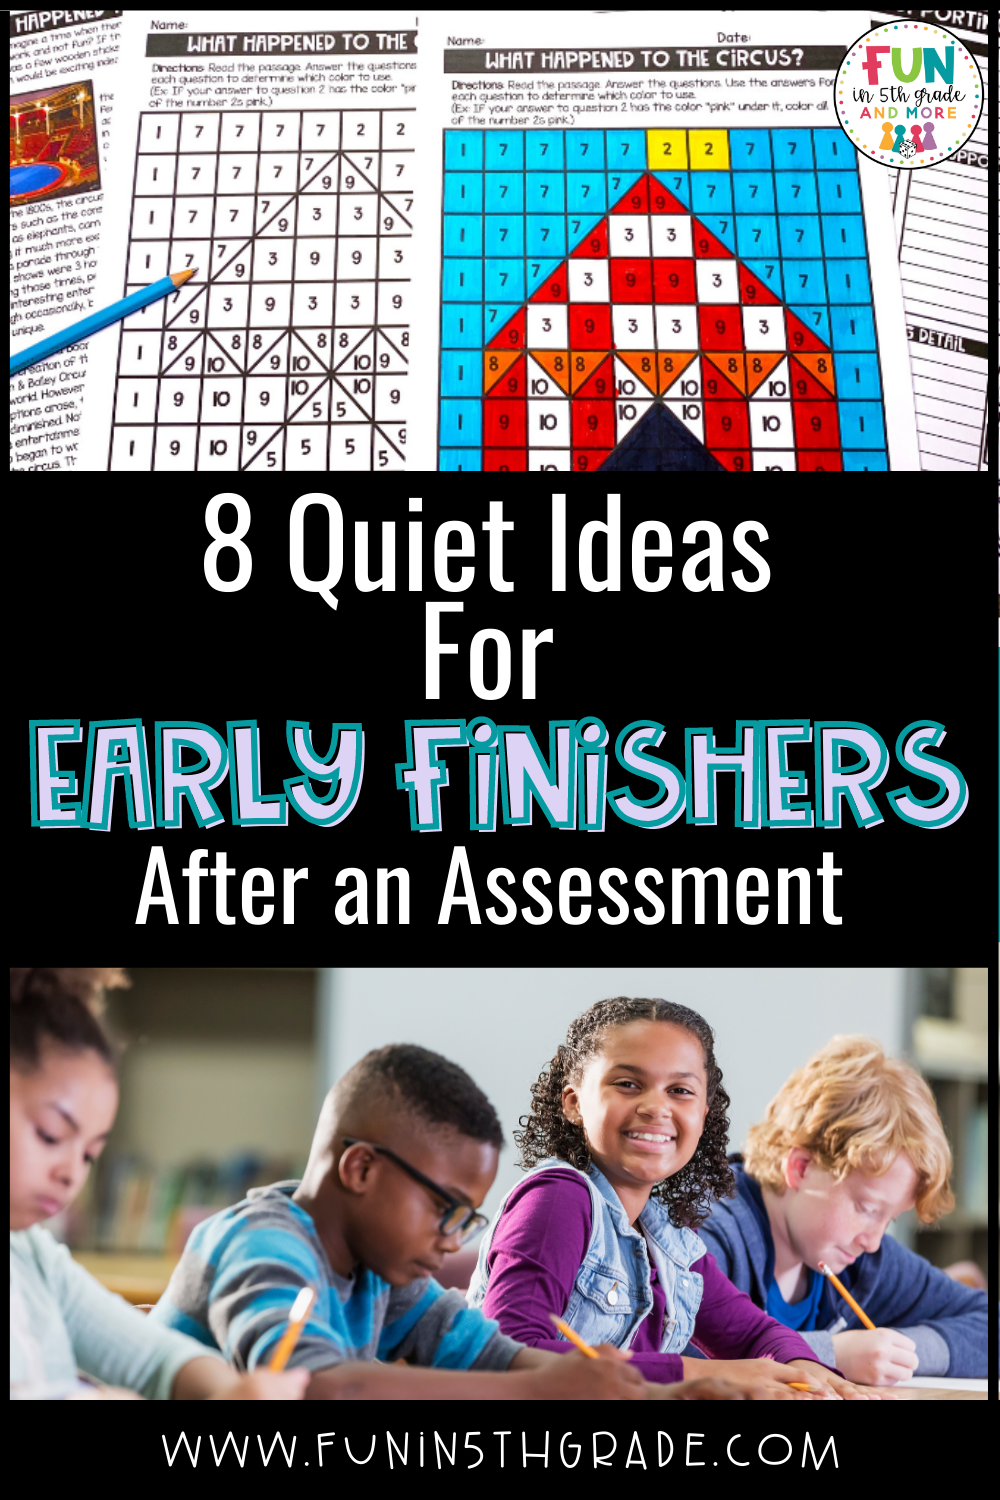 8 quiet ideas for early finishers after an assessment